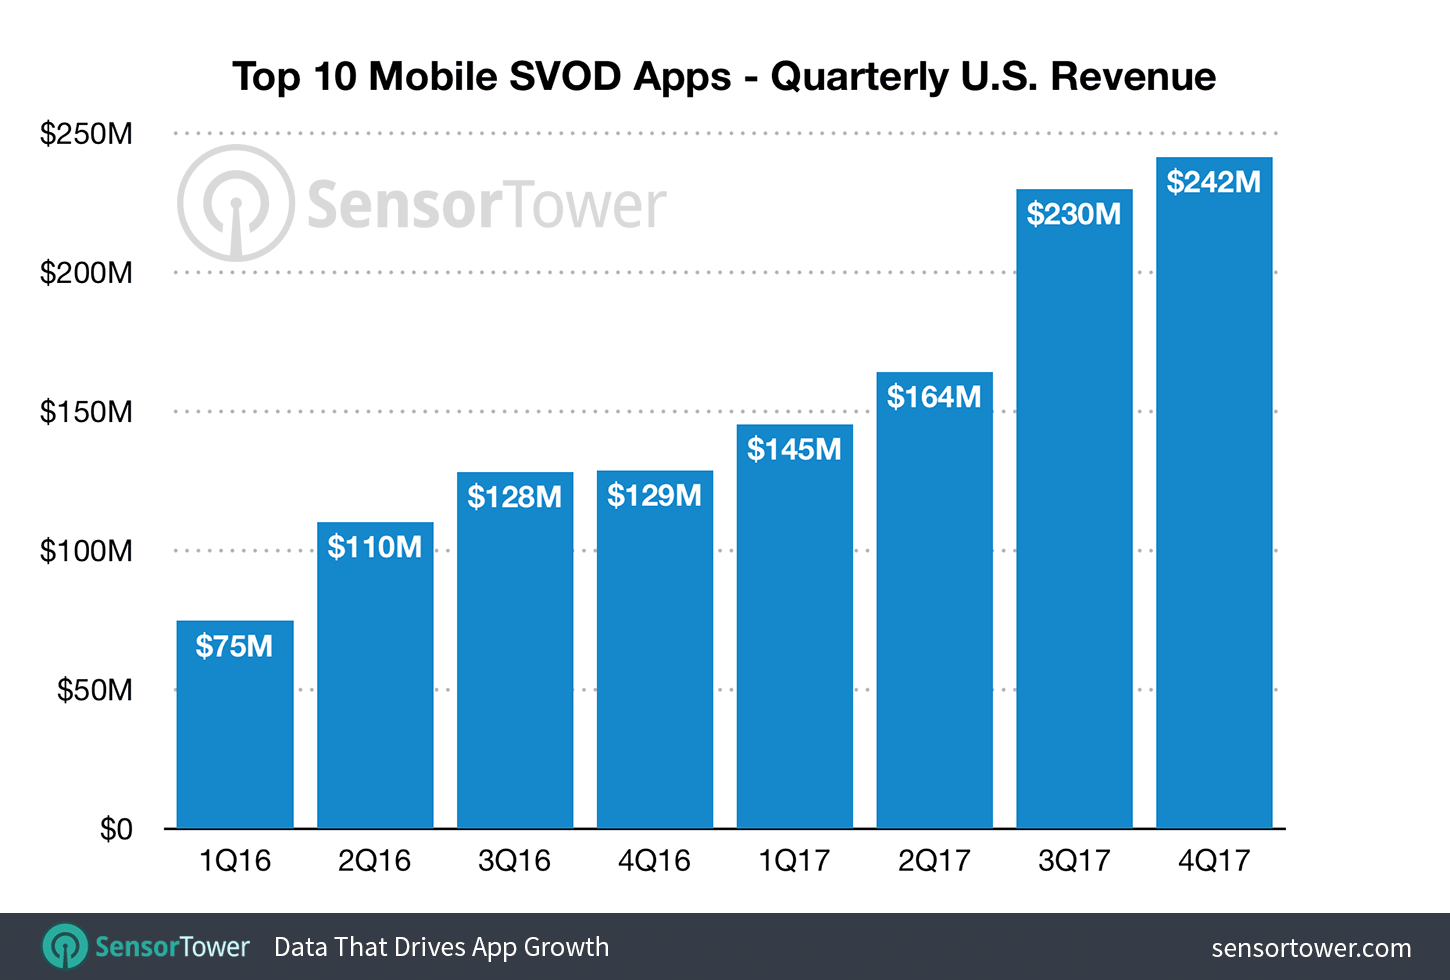 Quarterly Revenue for the Top 10 U.S. SVOD Apps for 2016 and 2017